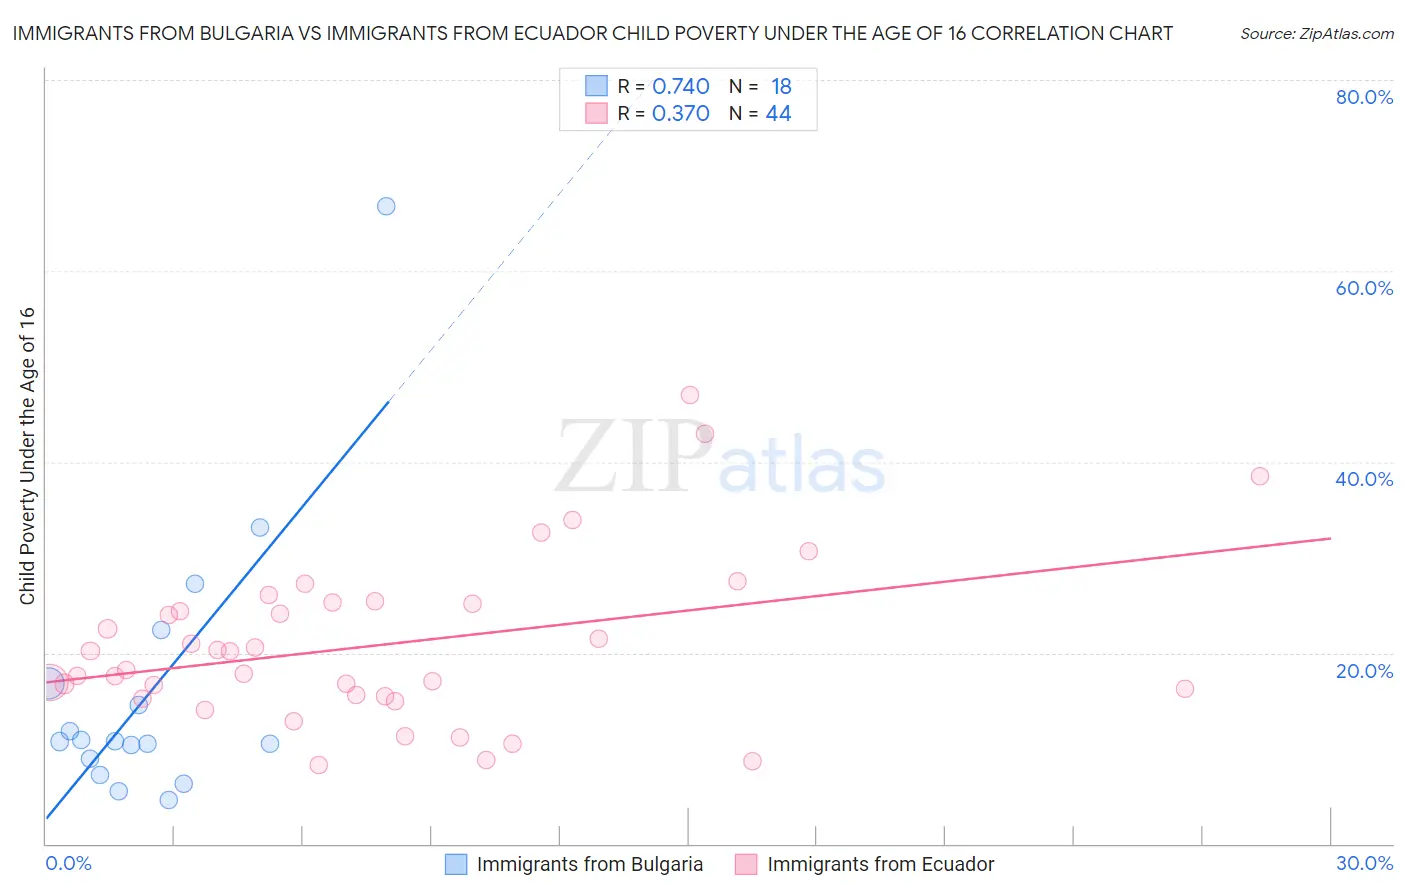 Immigrants from Bulgaria vs Immigrants from Ecuador Child Poverty Under the Age of 16